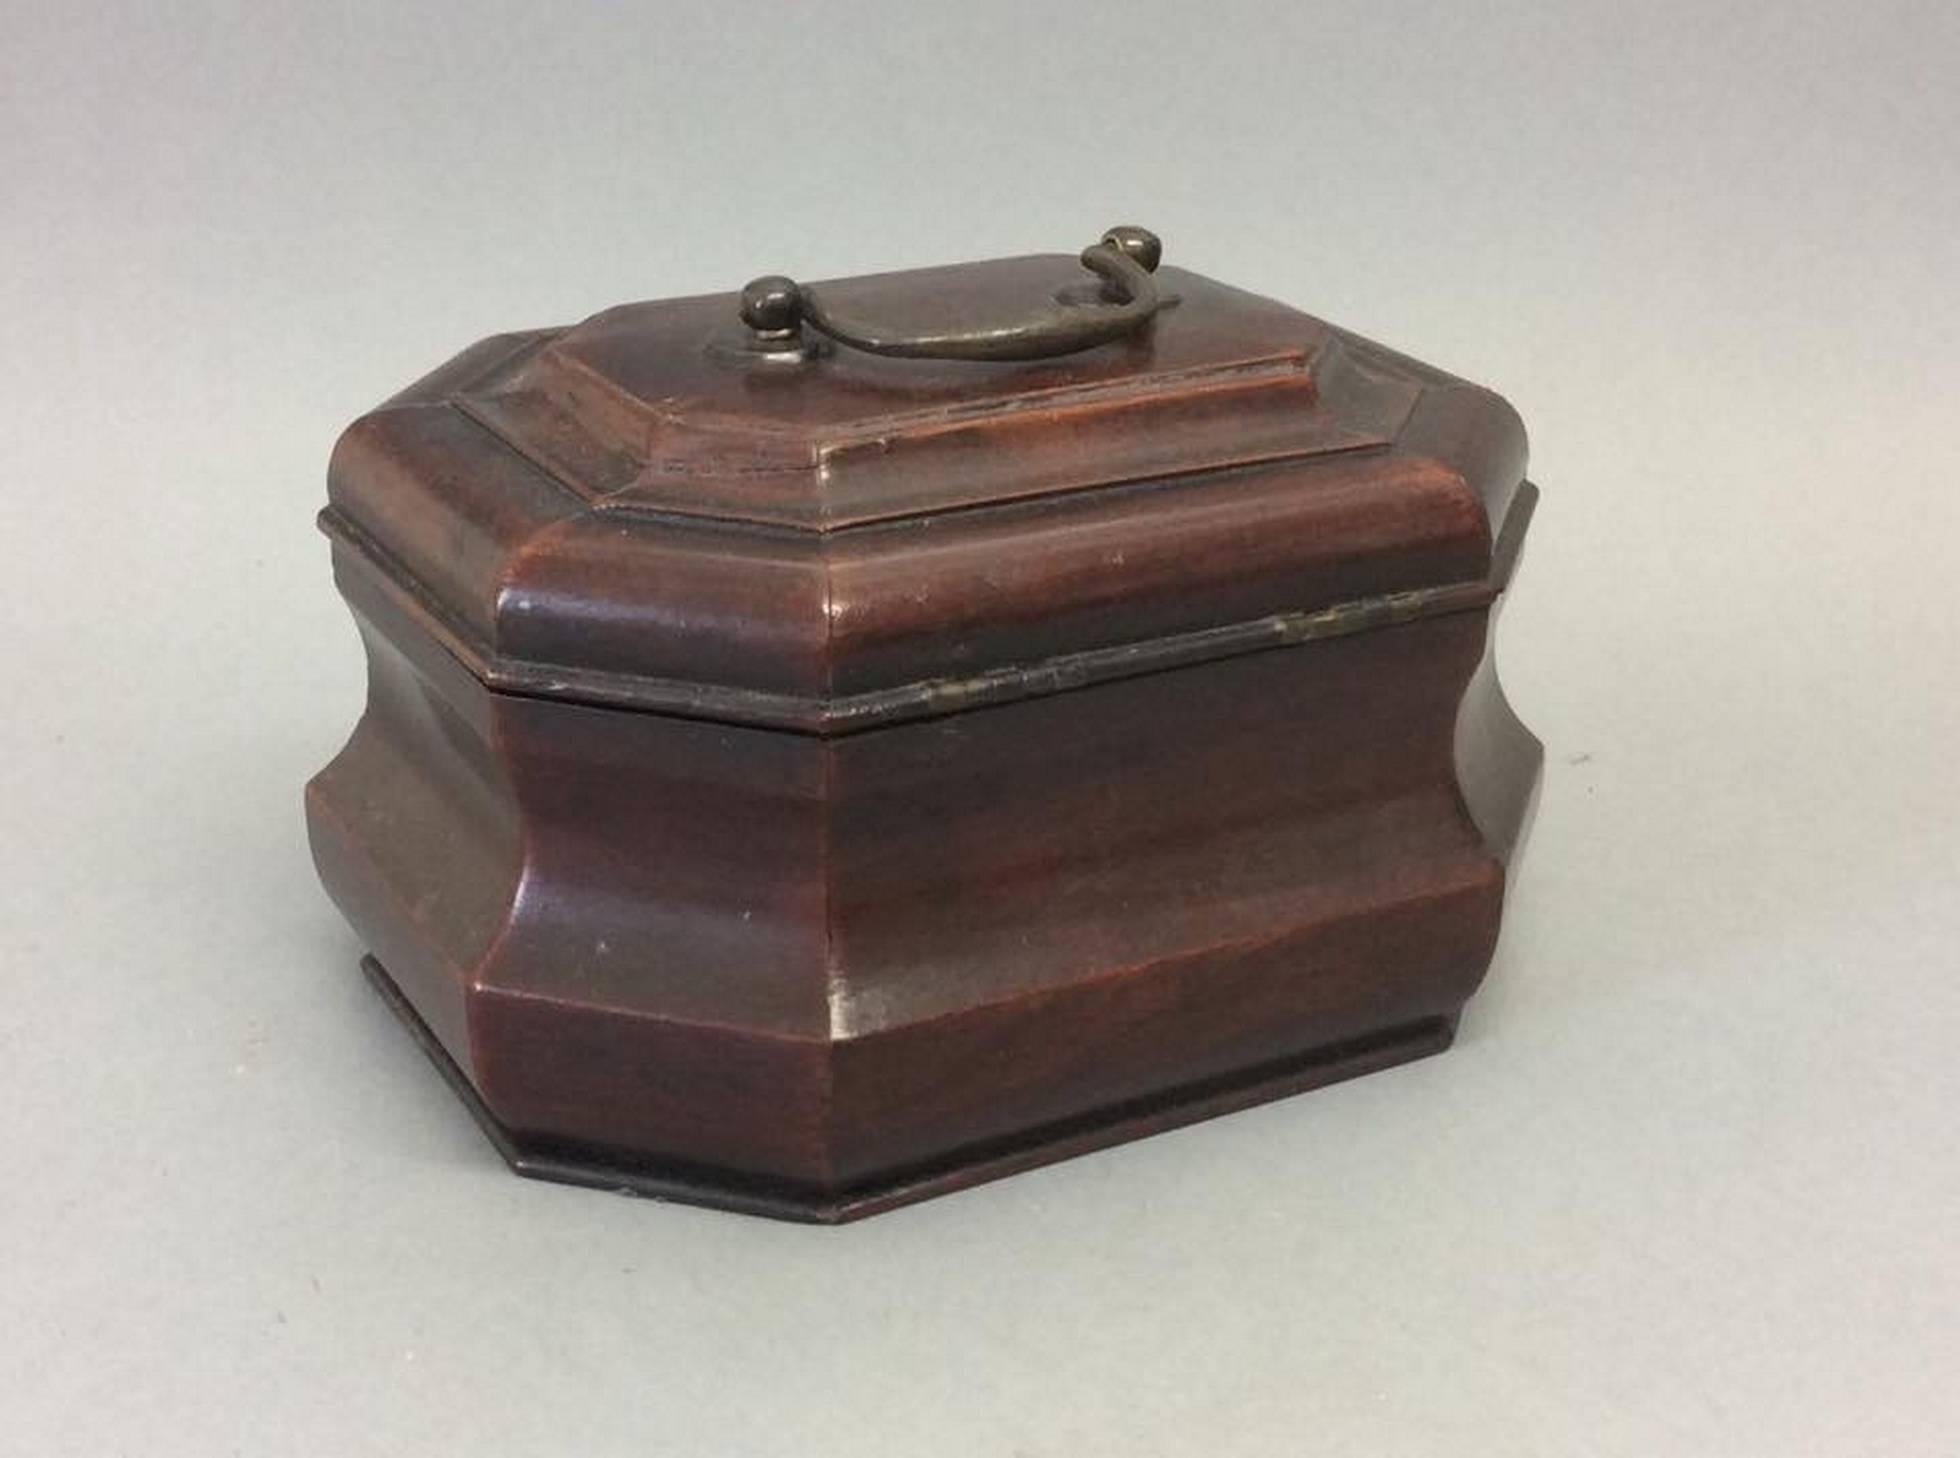 A very rare George III period mahogany tobacco box, the interior retaining a silver metalized lining with a replacement lid, retaining original escutcheon and handle.